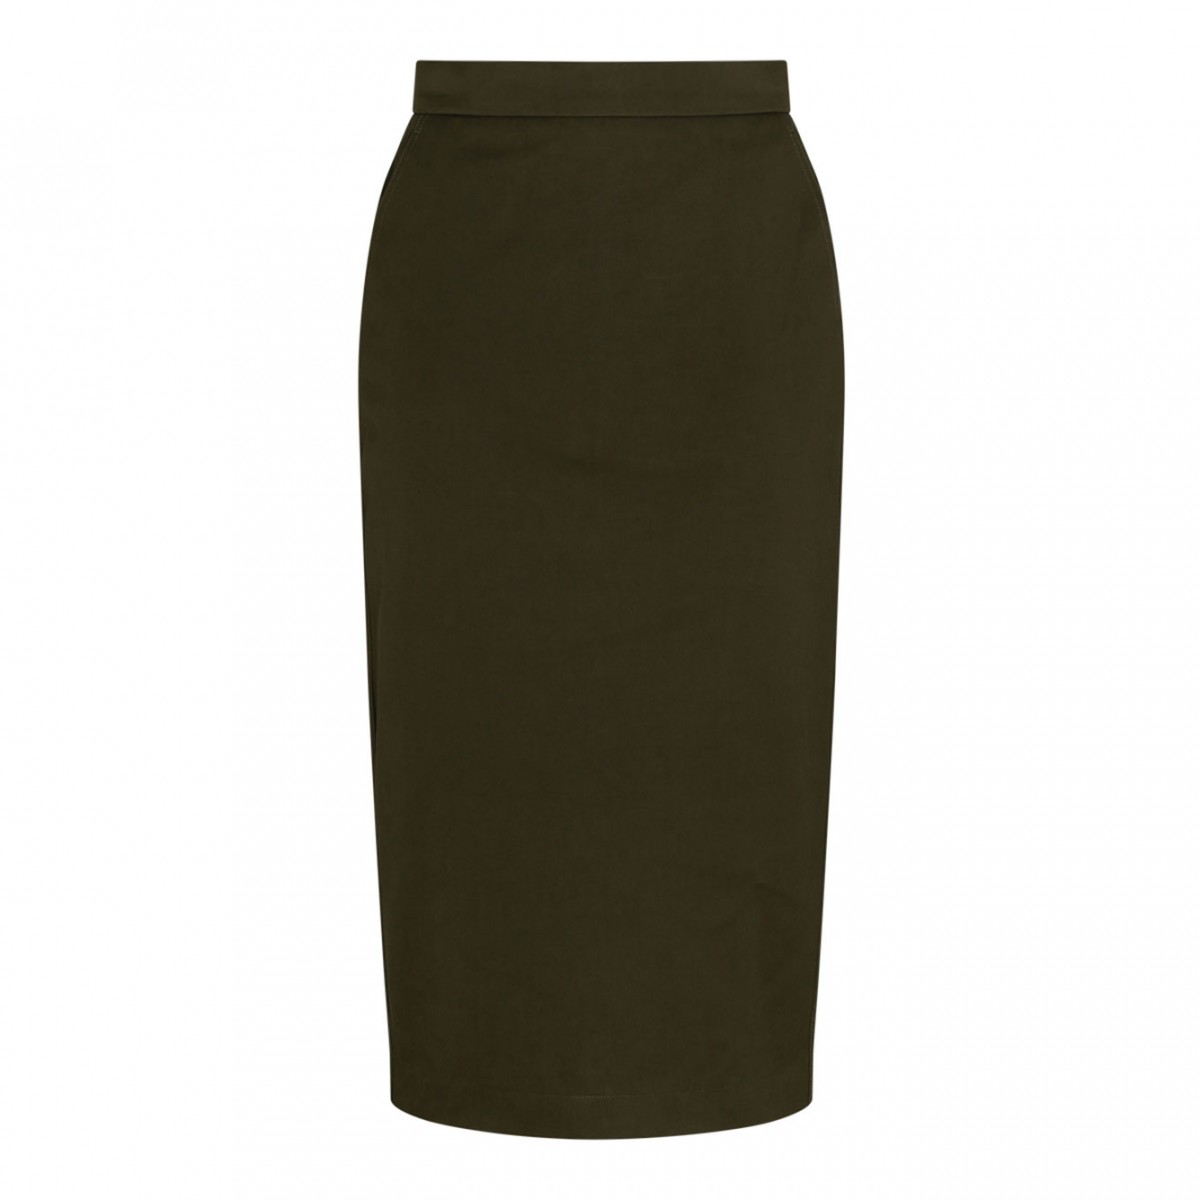 Olive Green Canvas Skirt